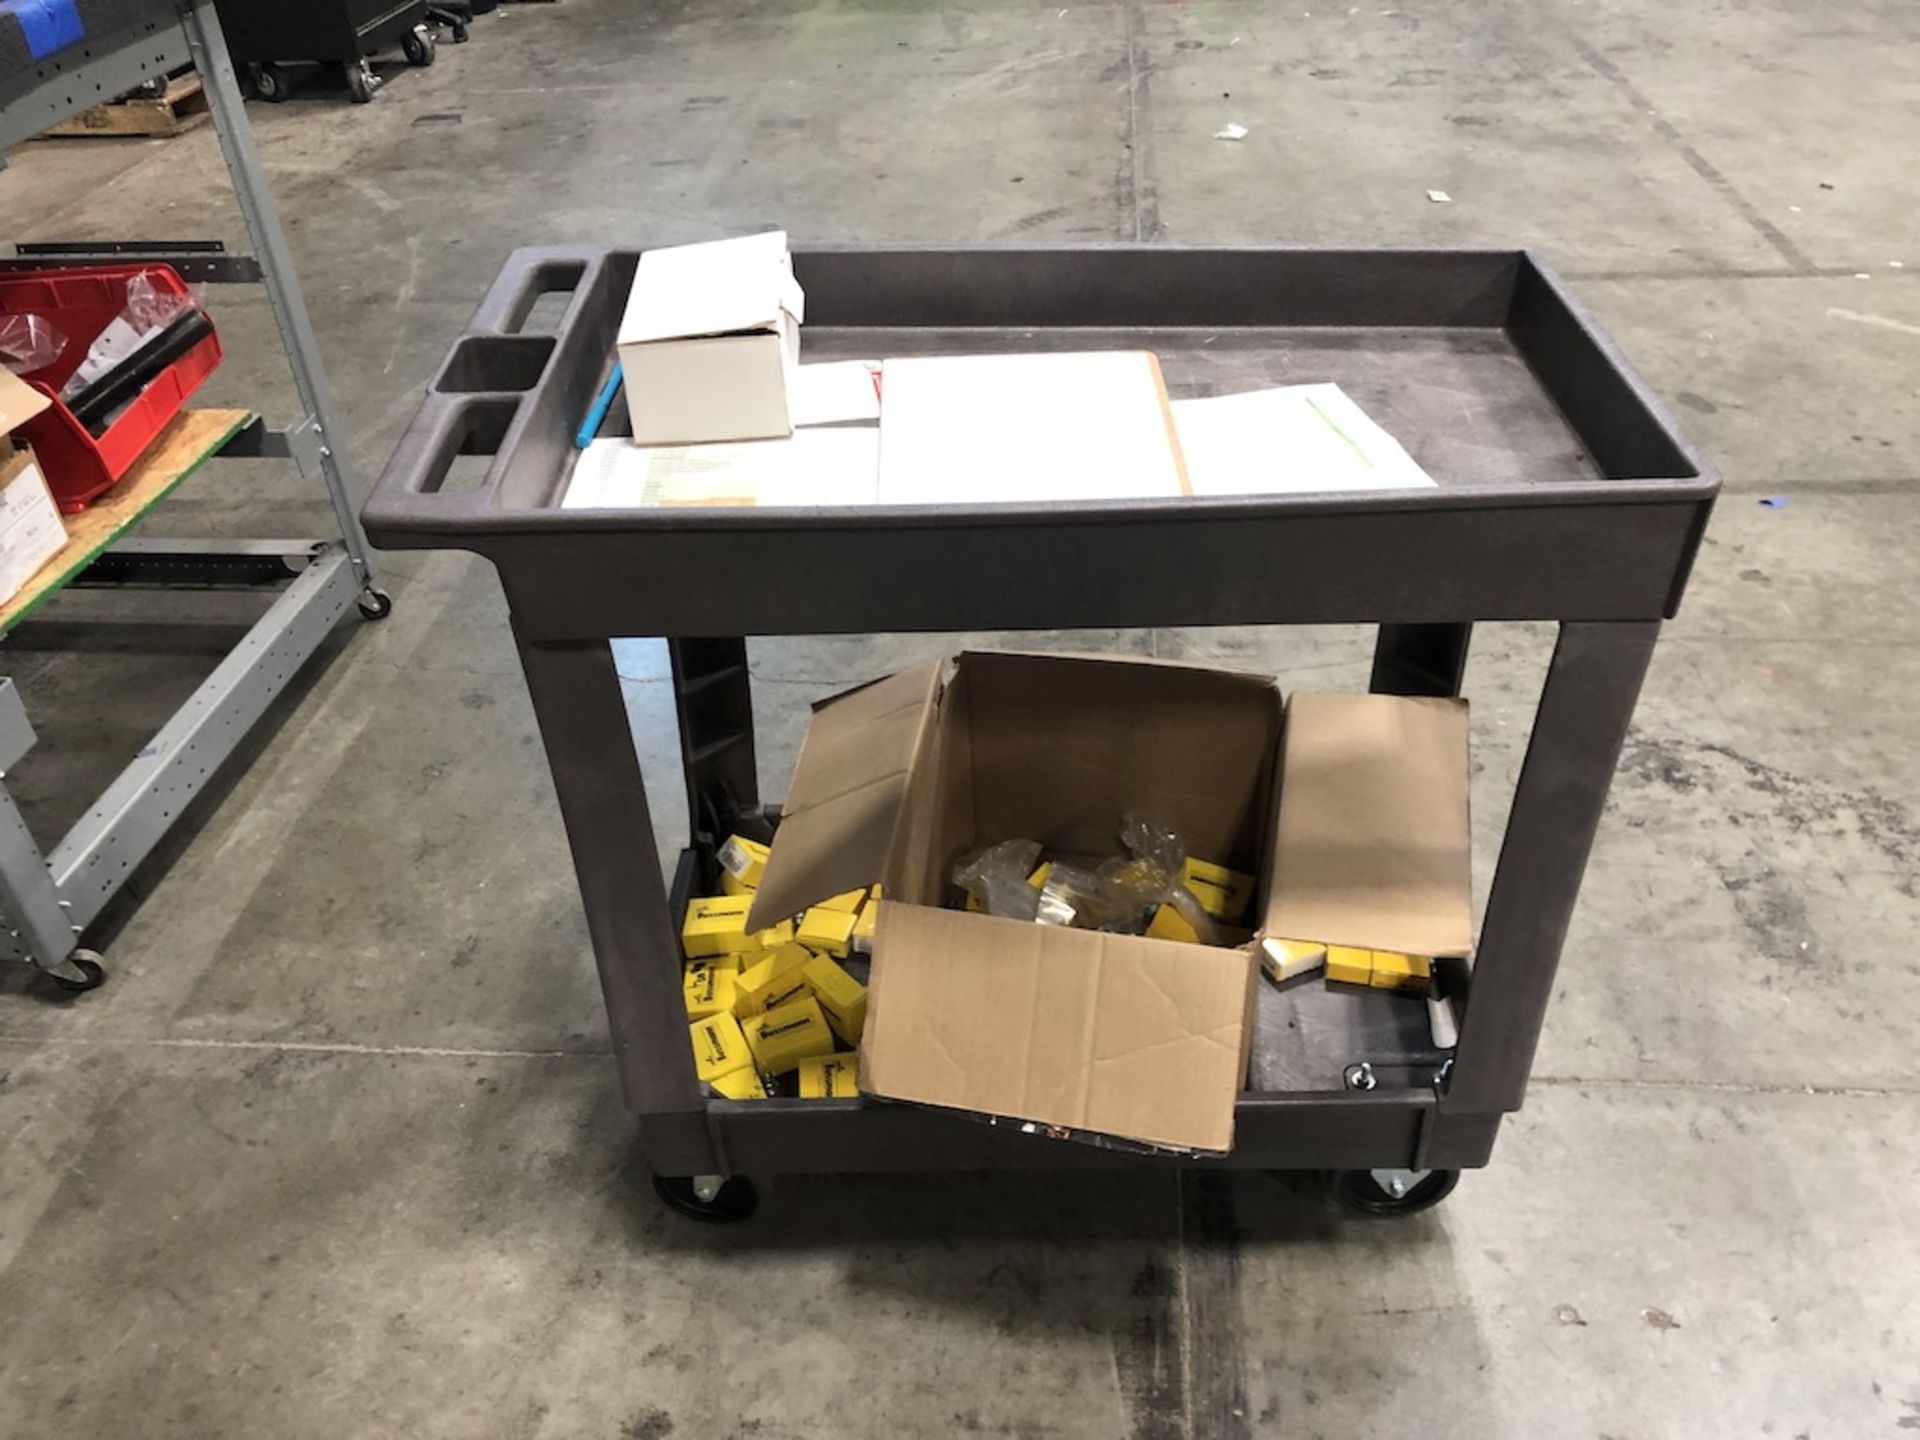 PLASTIC CART 34IN L X 17.5IN W X 33IN H ( CONTENTS NOT INCLUDED )   SCHNEIDER ELECTRIC- 6611 PRESTON